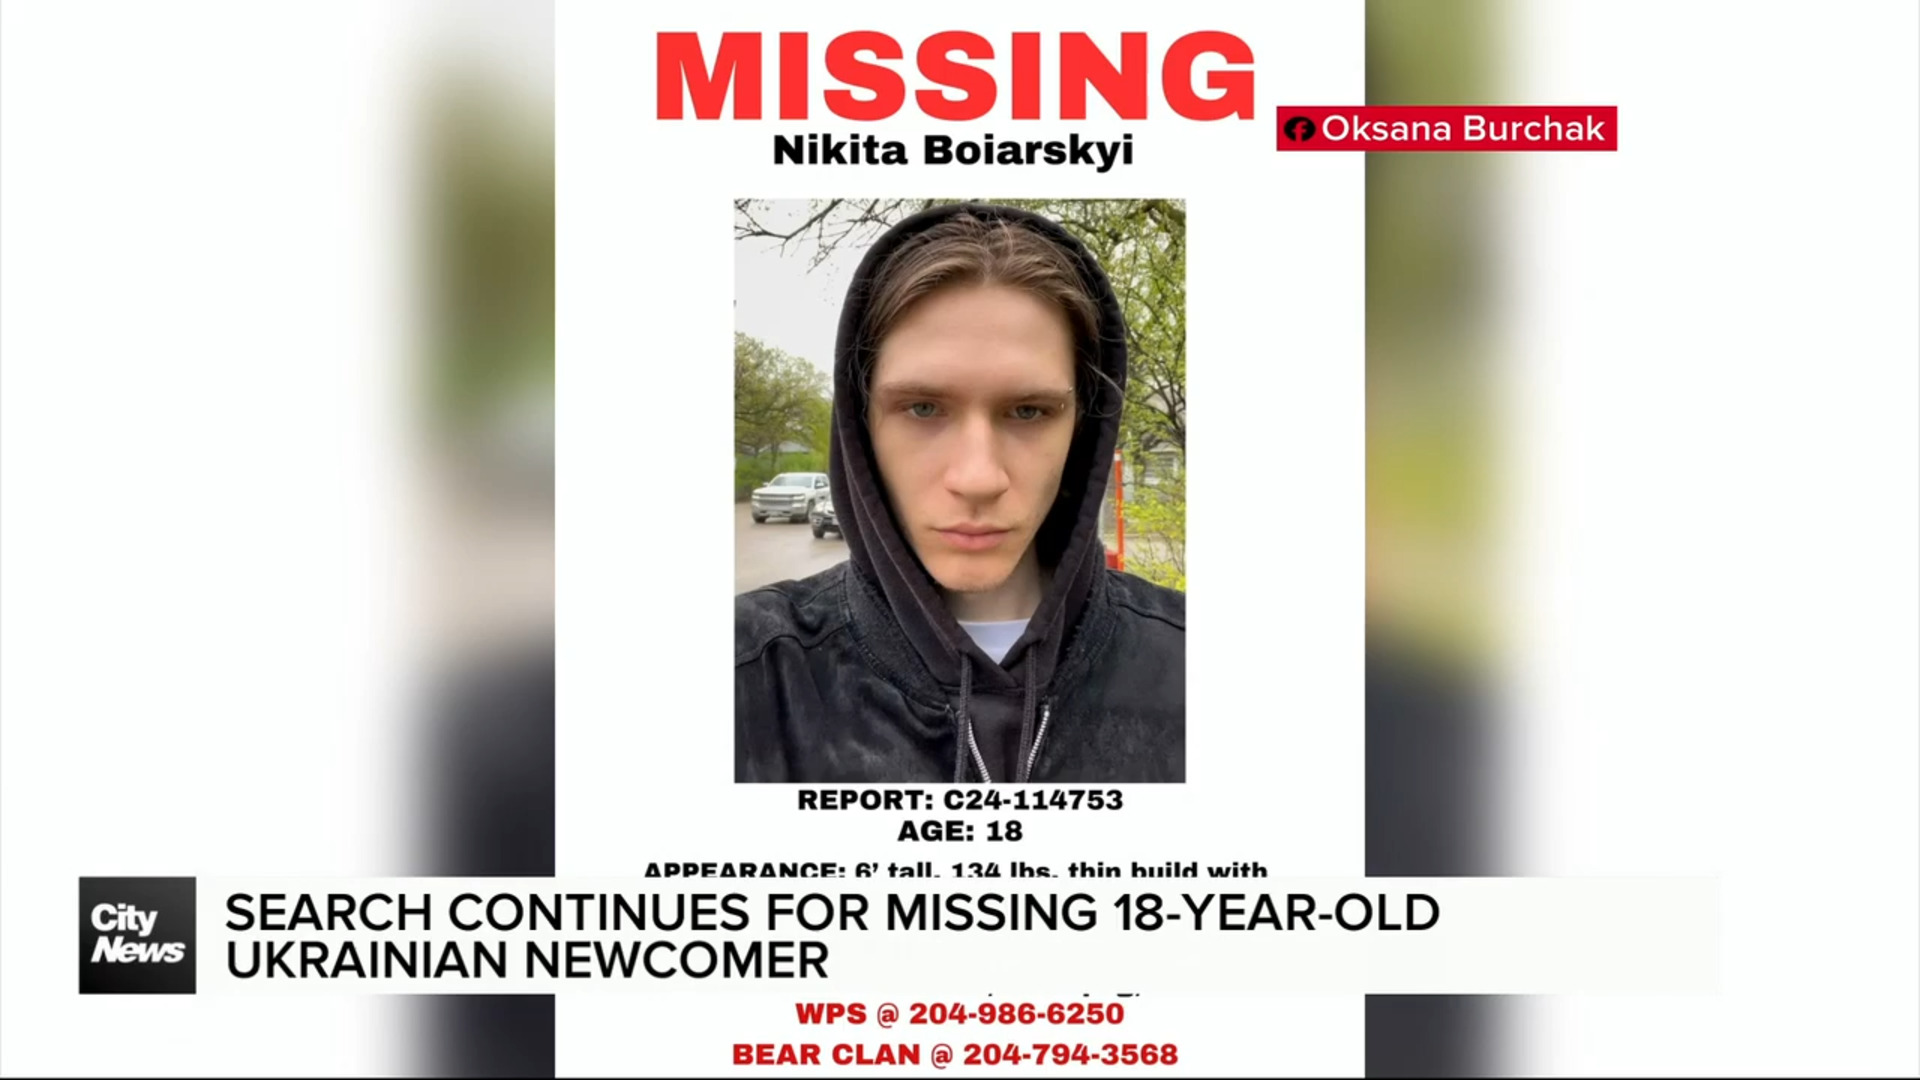 Search for missing 18-year-old Ukrainian continues